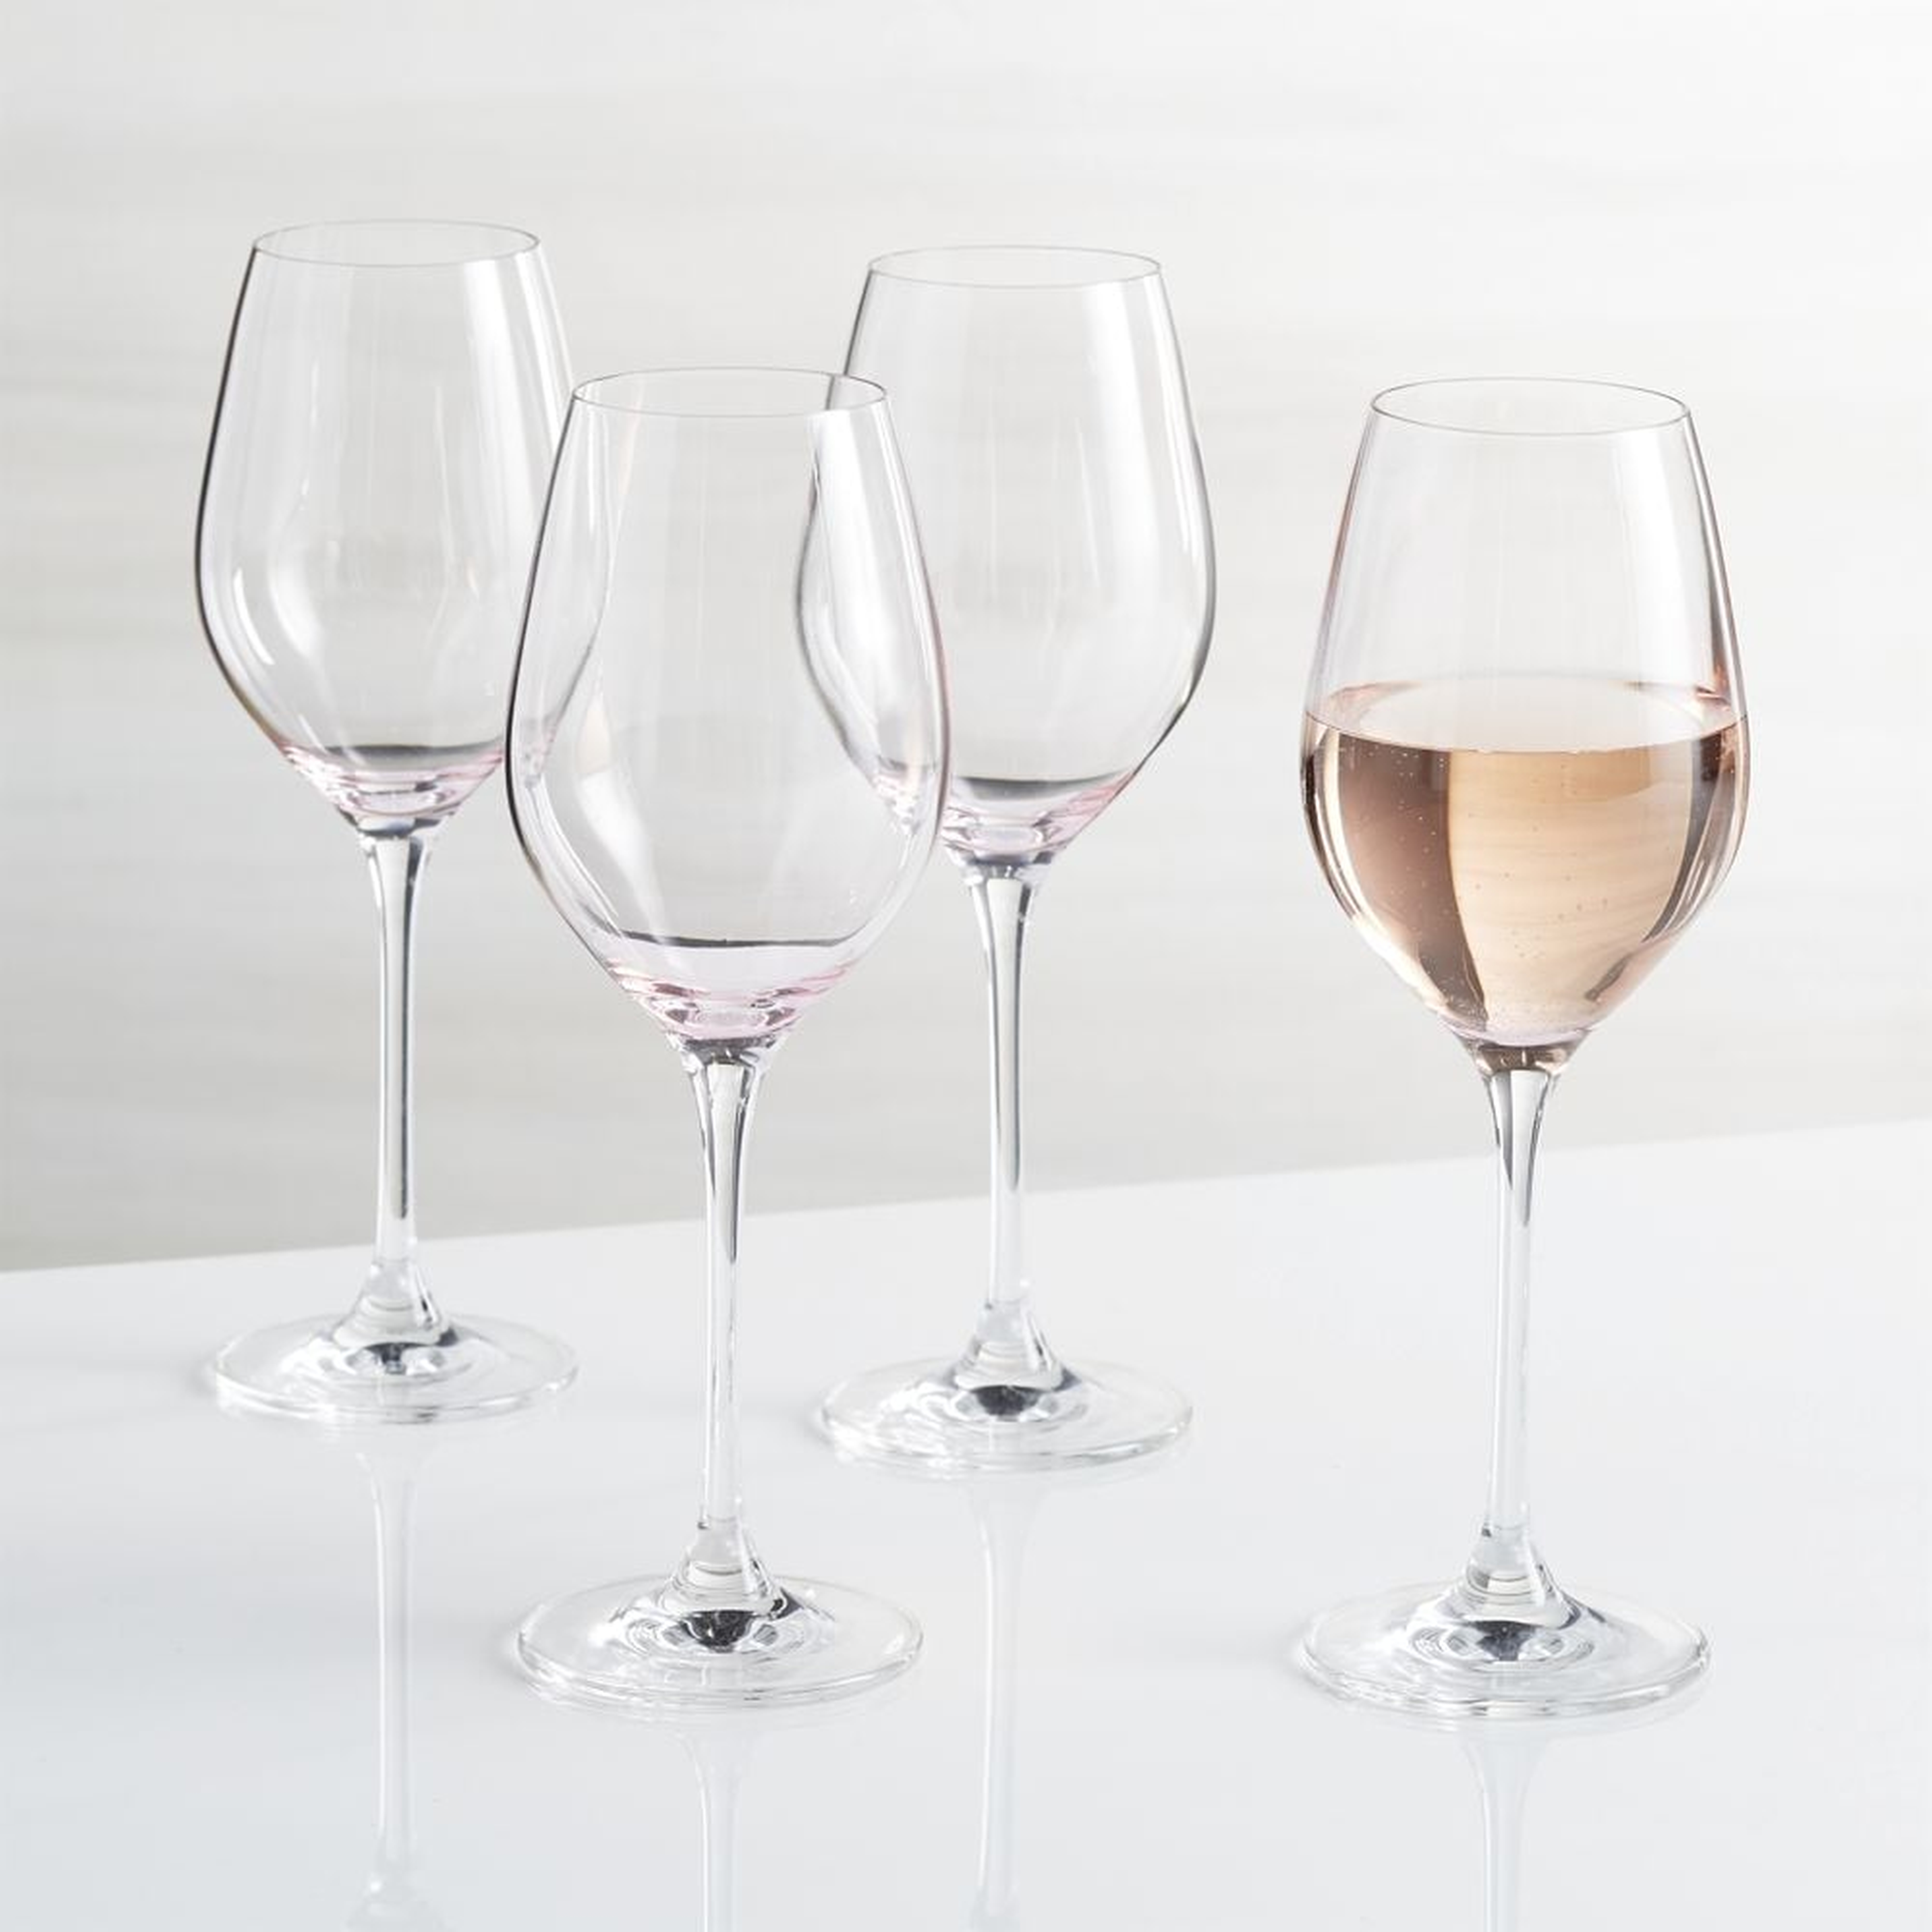 Rose Wine Glass, Set of 4 - Crate and Barrel